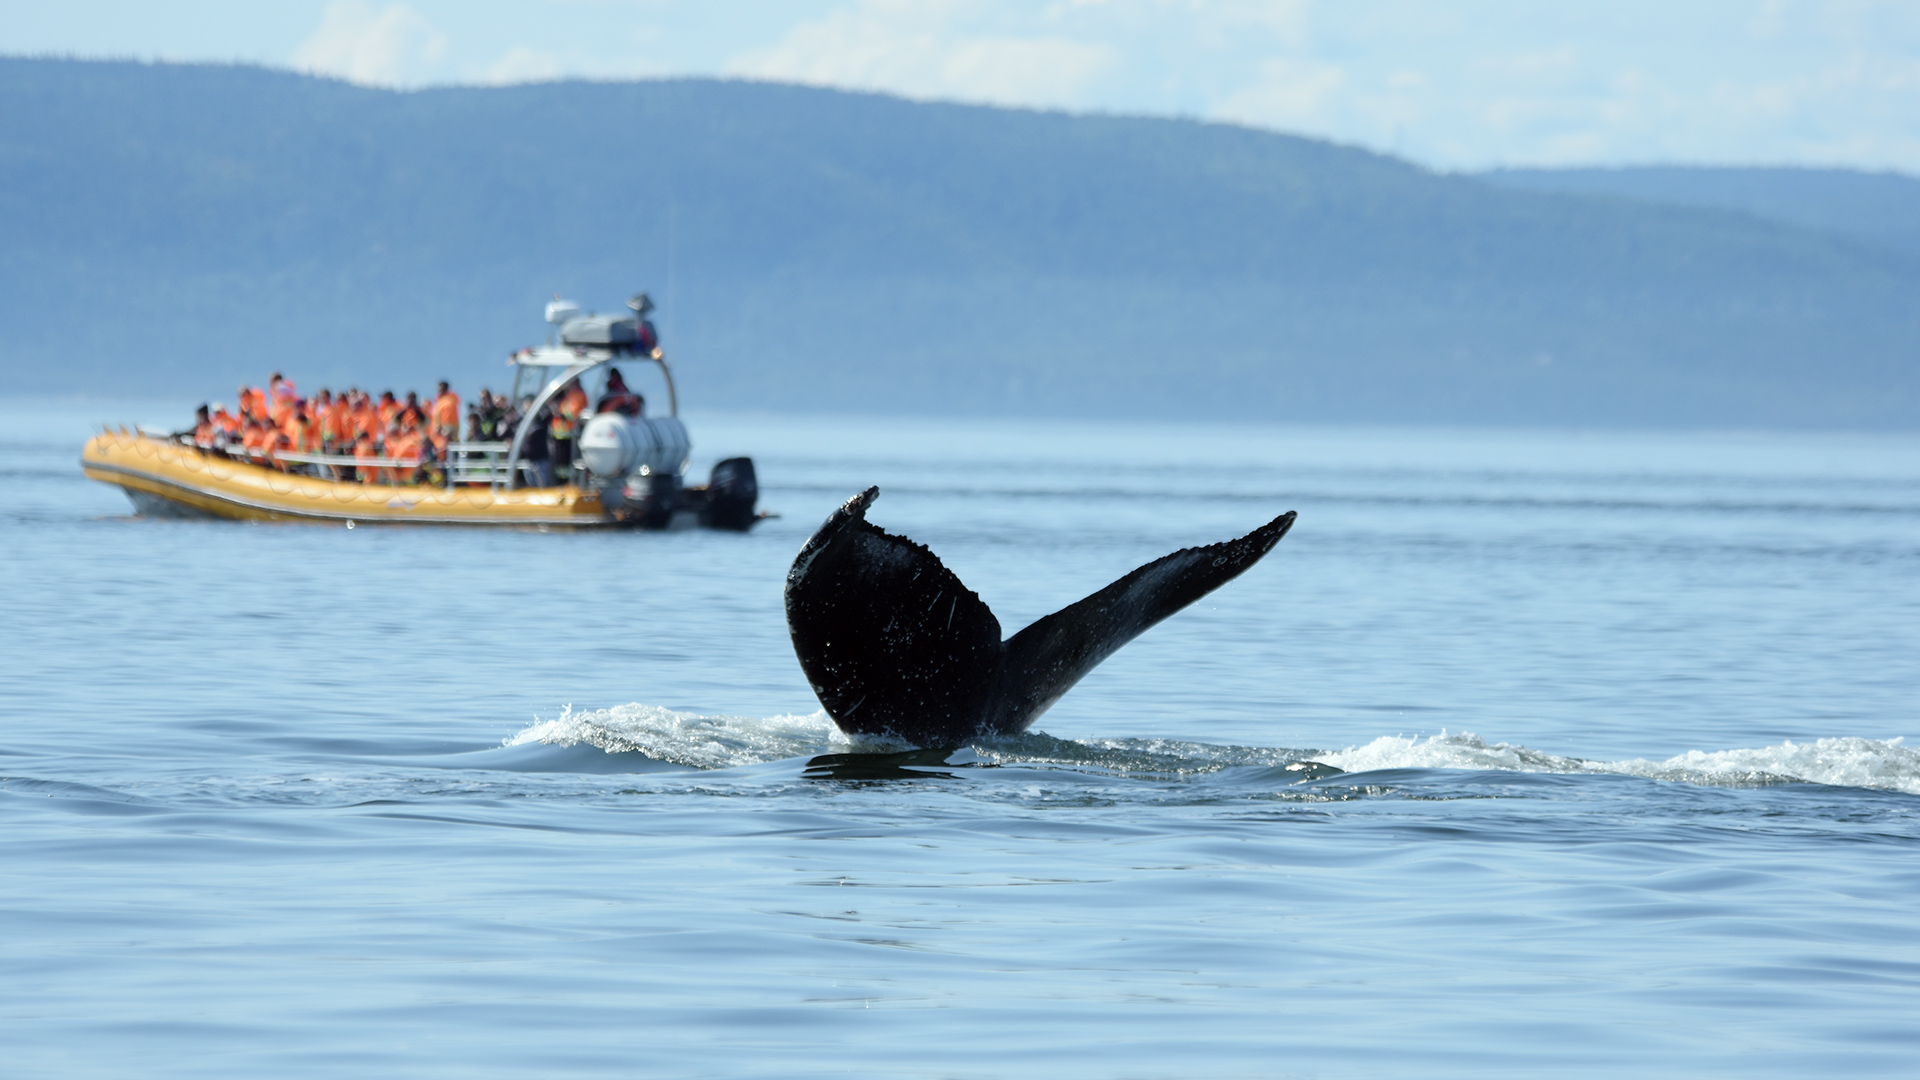 In the foreground is the tail of a diving humpback. In the background, a whale-watching boat slowly moves away.